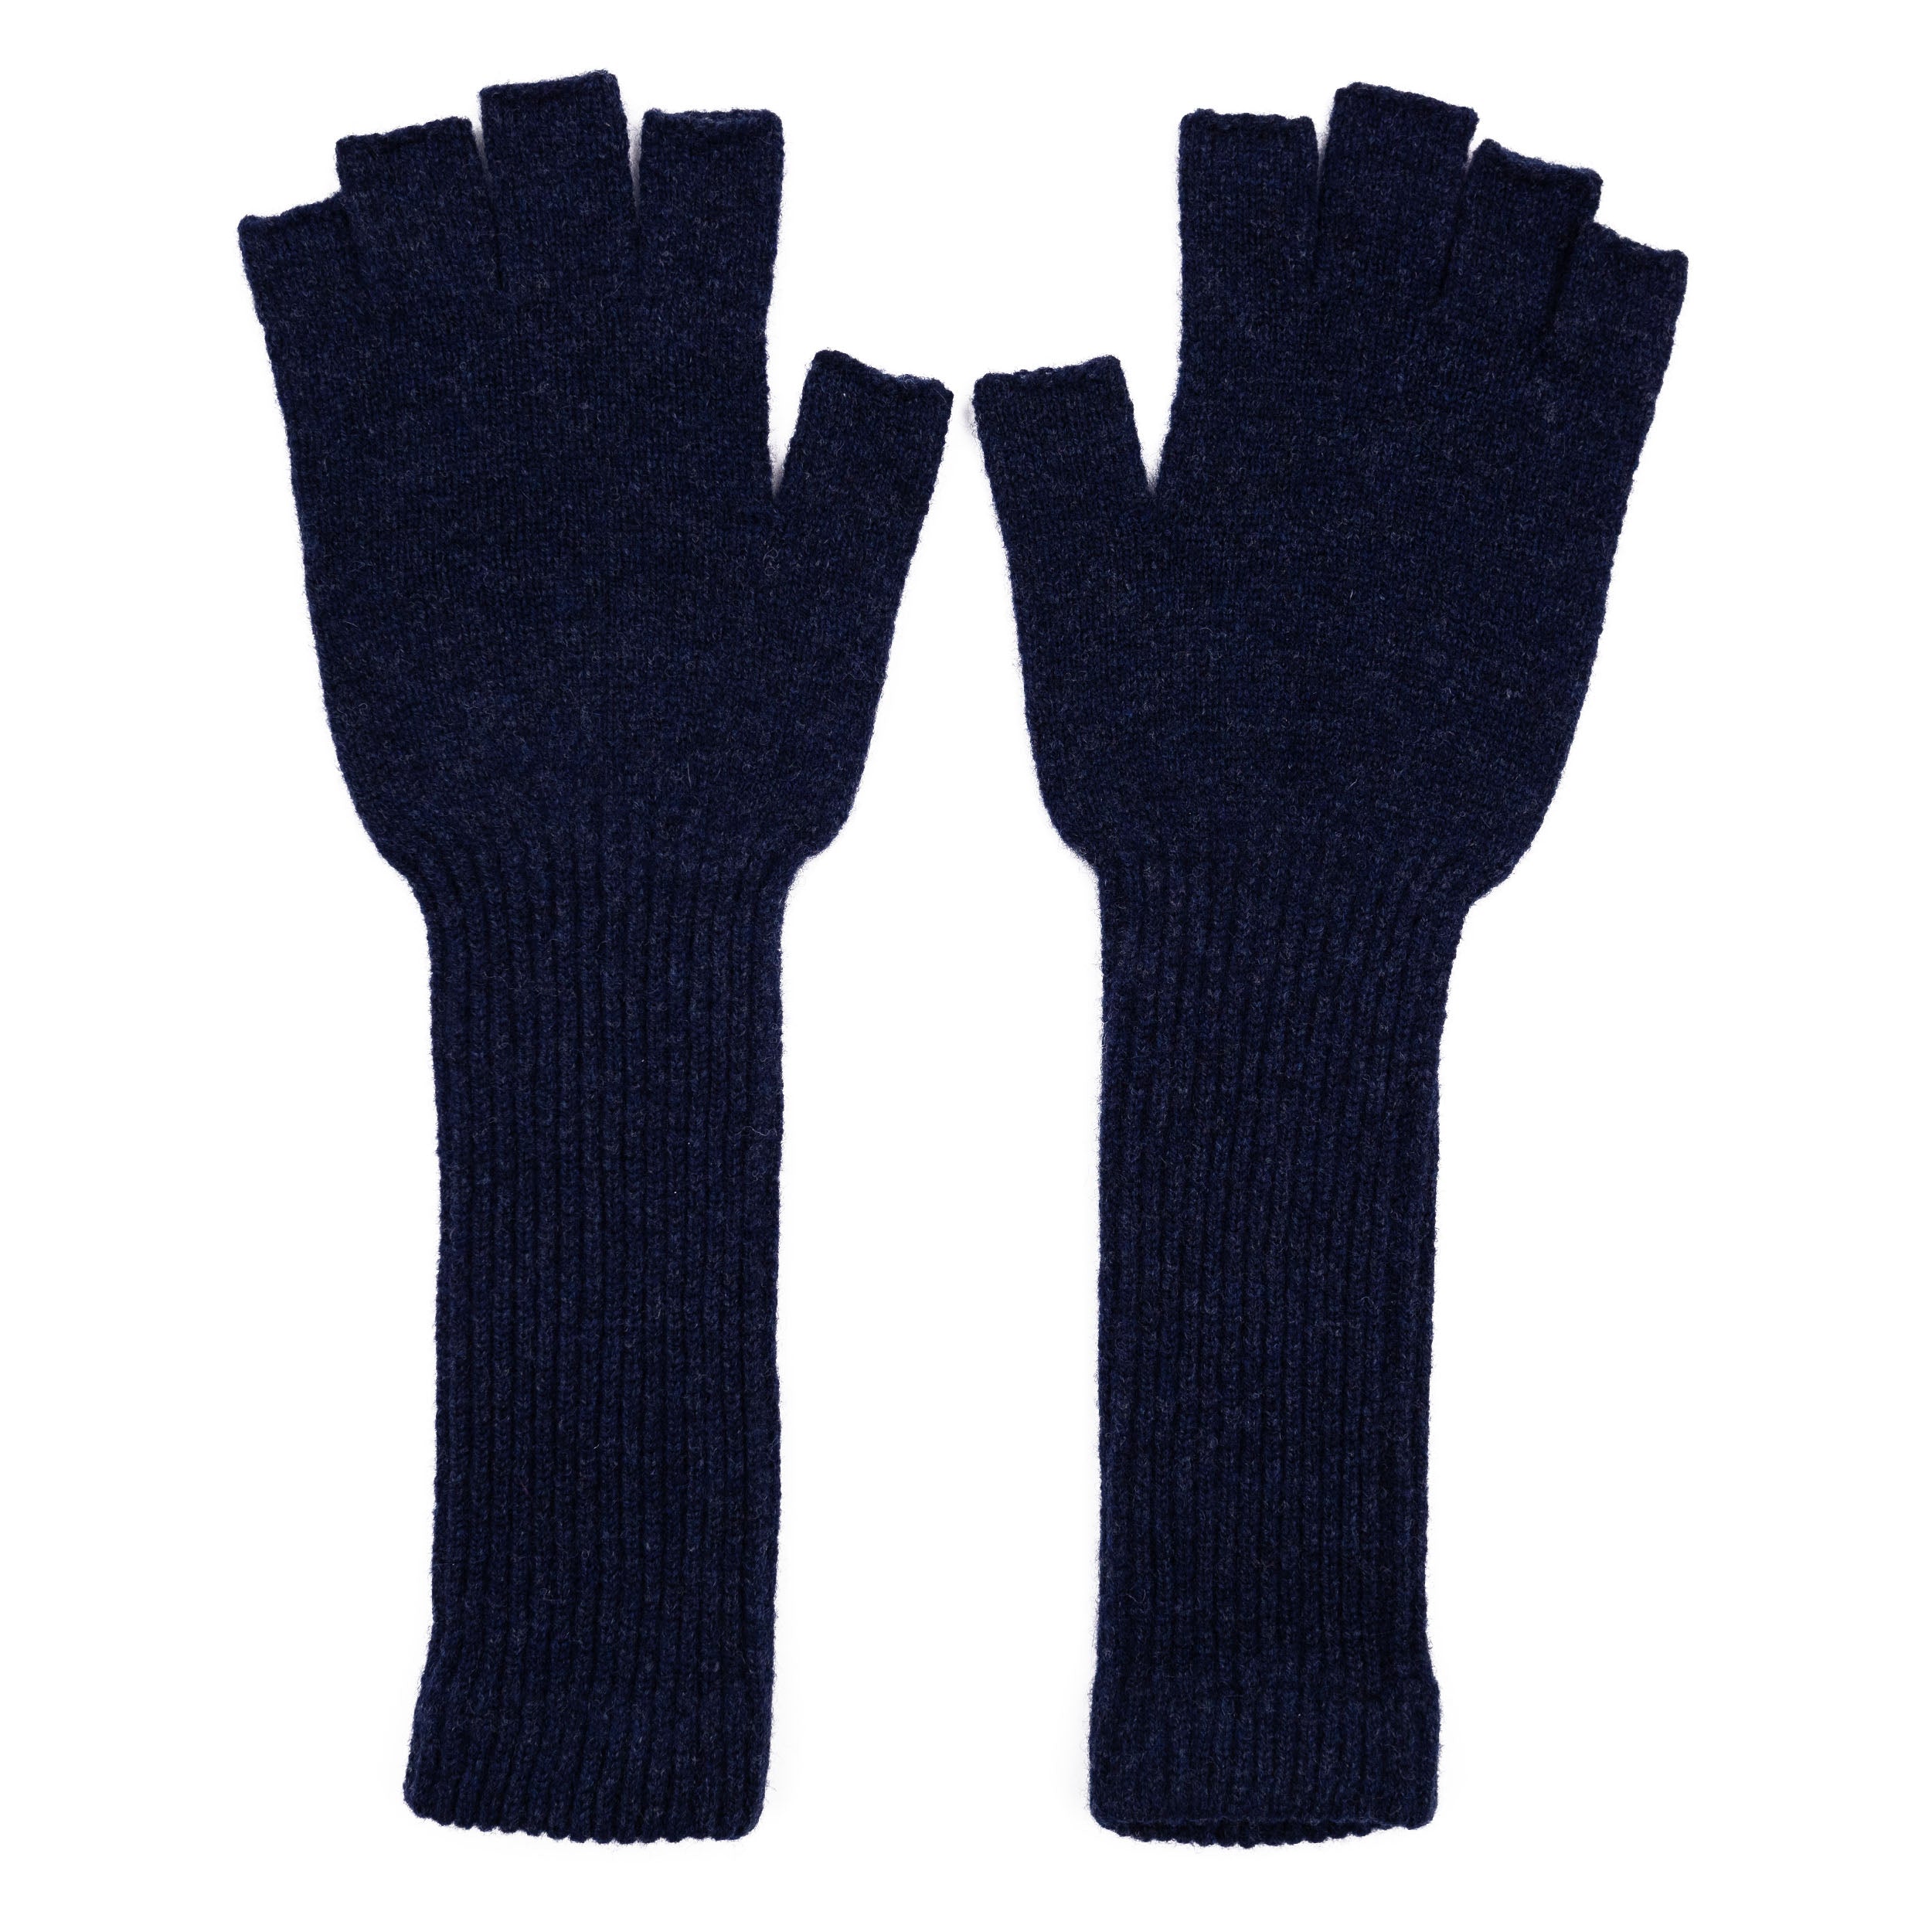 Carrier Company Gathering Glove in Navy Marl